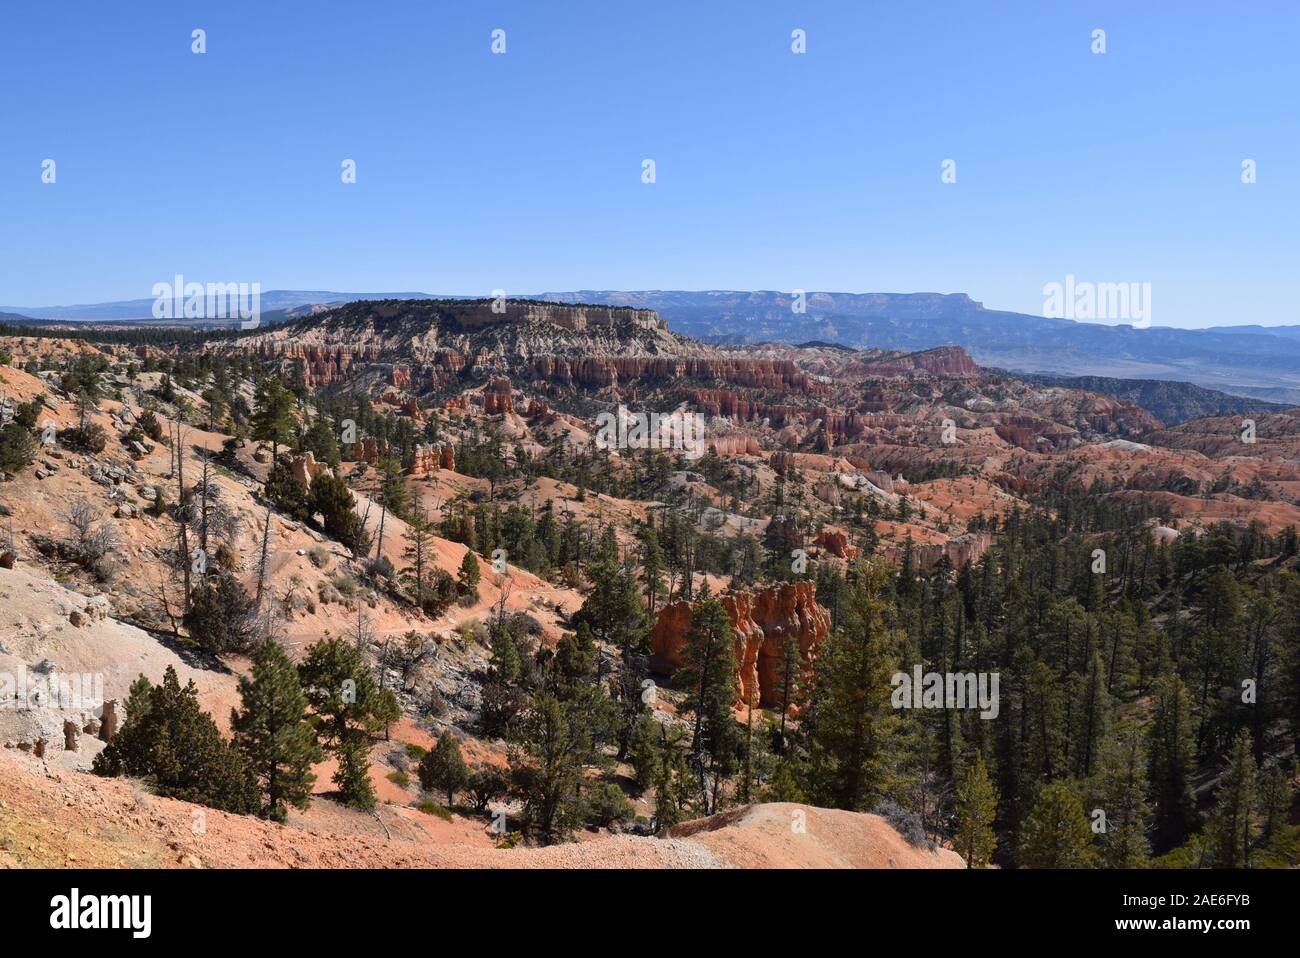 View of the Colorado Plateau in the distance from Bryce Canyon national park. Stock Photo